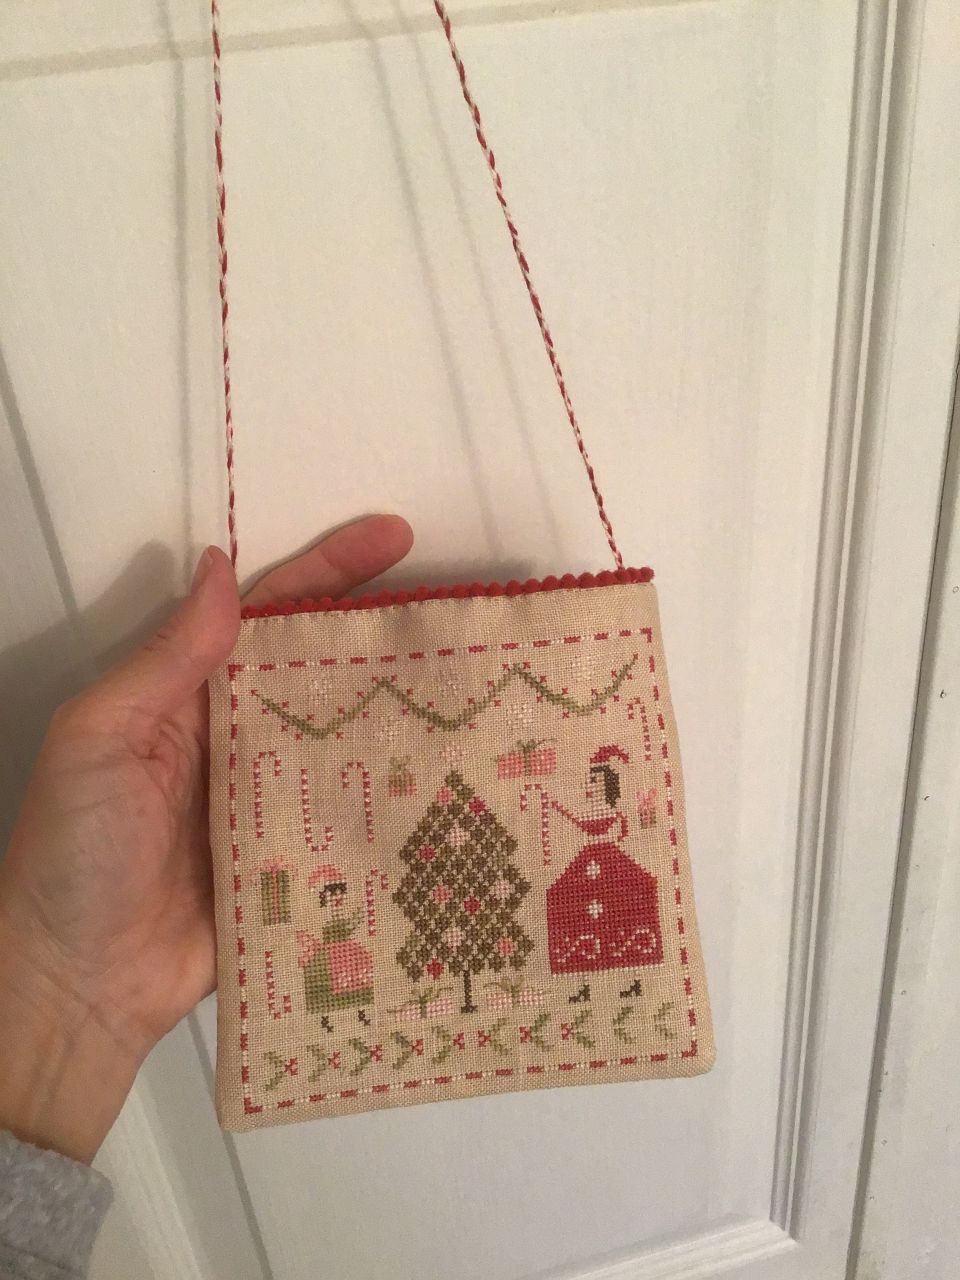 This is Merry and Bright by Pineberry Lane.  I finished the stitching earlier this year.  Assembly into a lined hanging pouch with pom pom trim and braided hanger was done yesterday and today.…..just in time for holiday decorating.  The fabric on the back of pouch is the same as inside lining fabric.